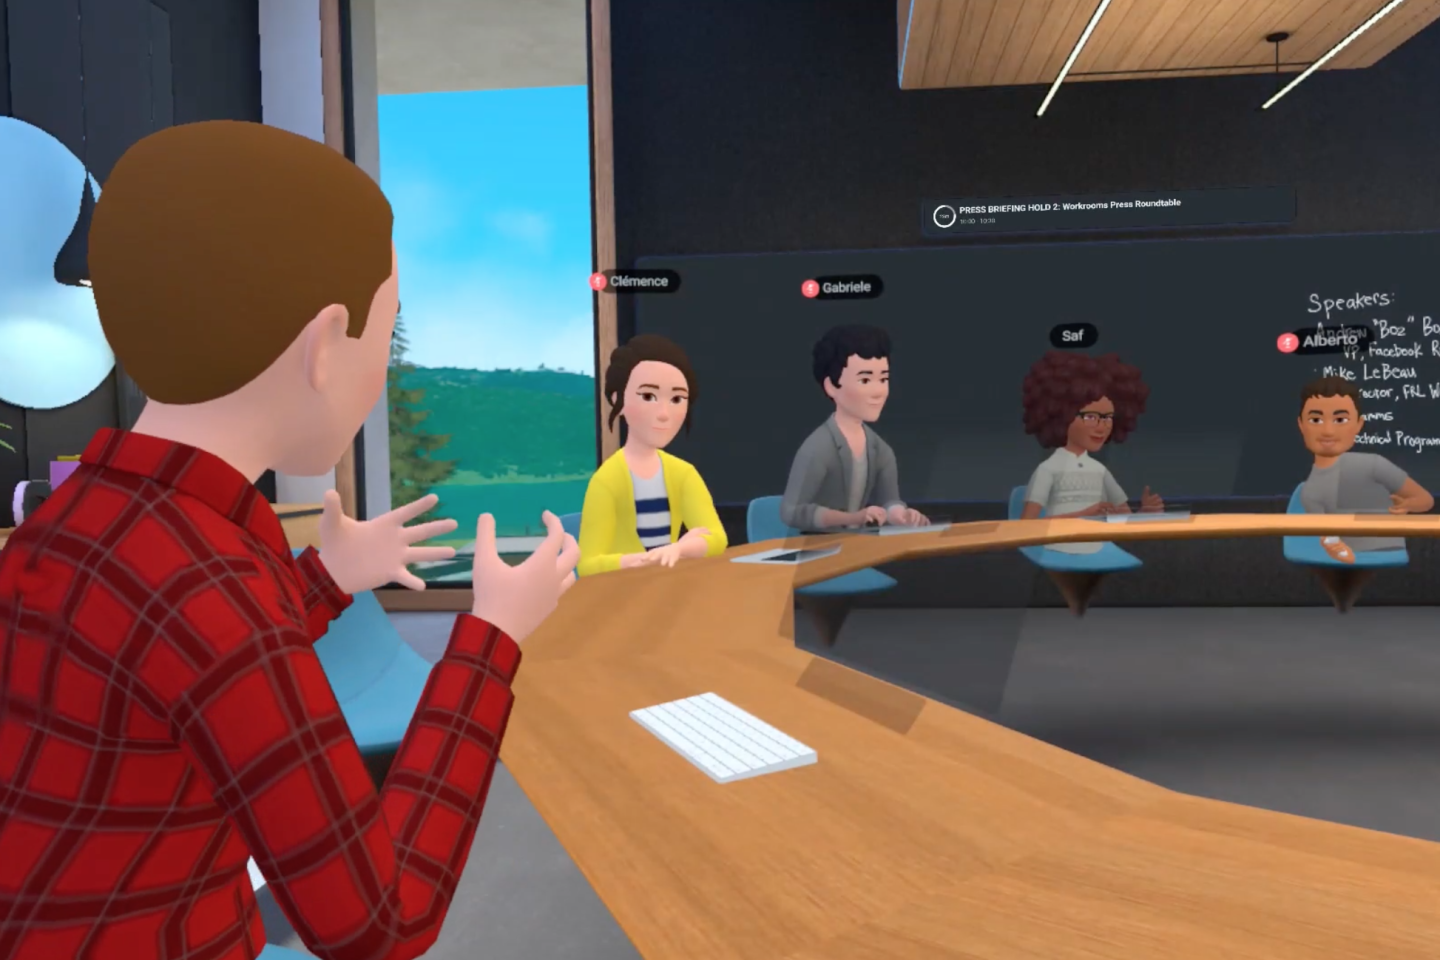 We tested... Horizon Workrooms, the new virtual reality application from Facebook